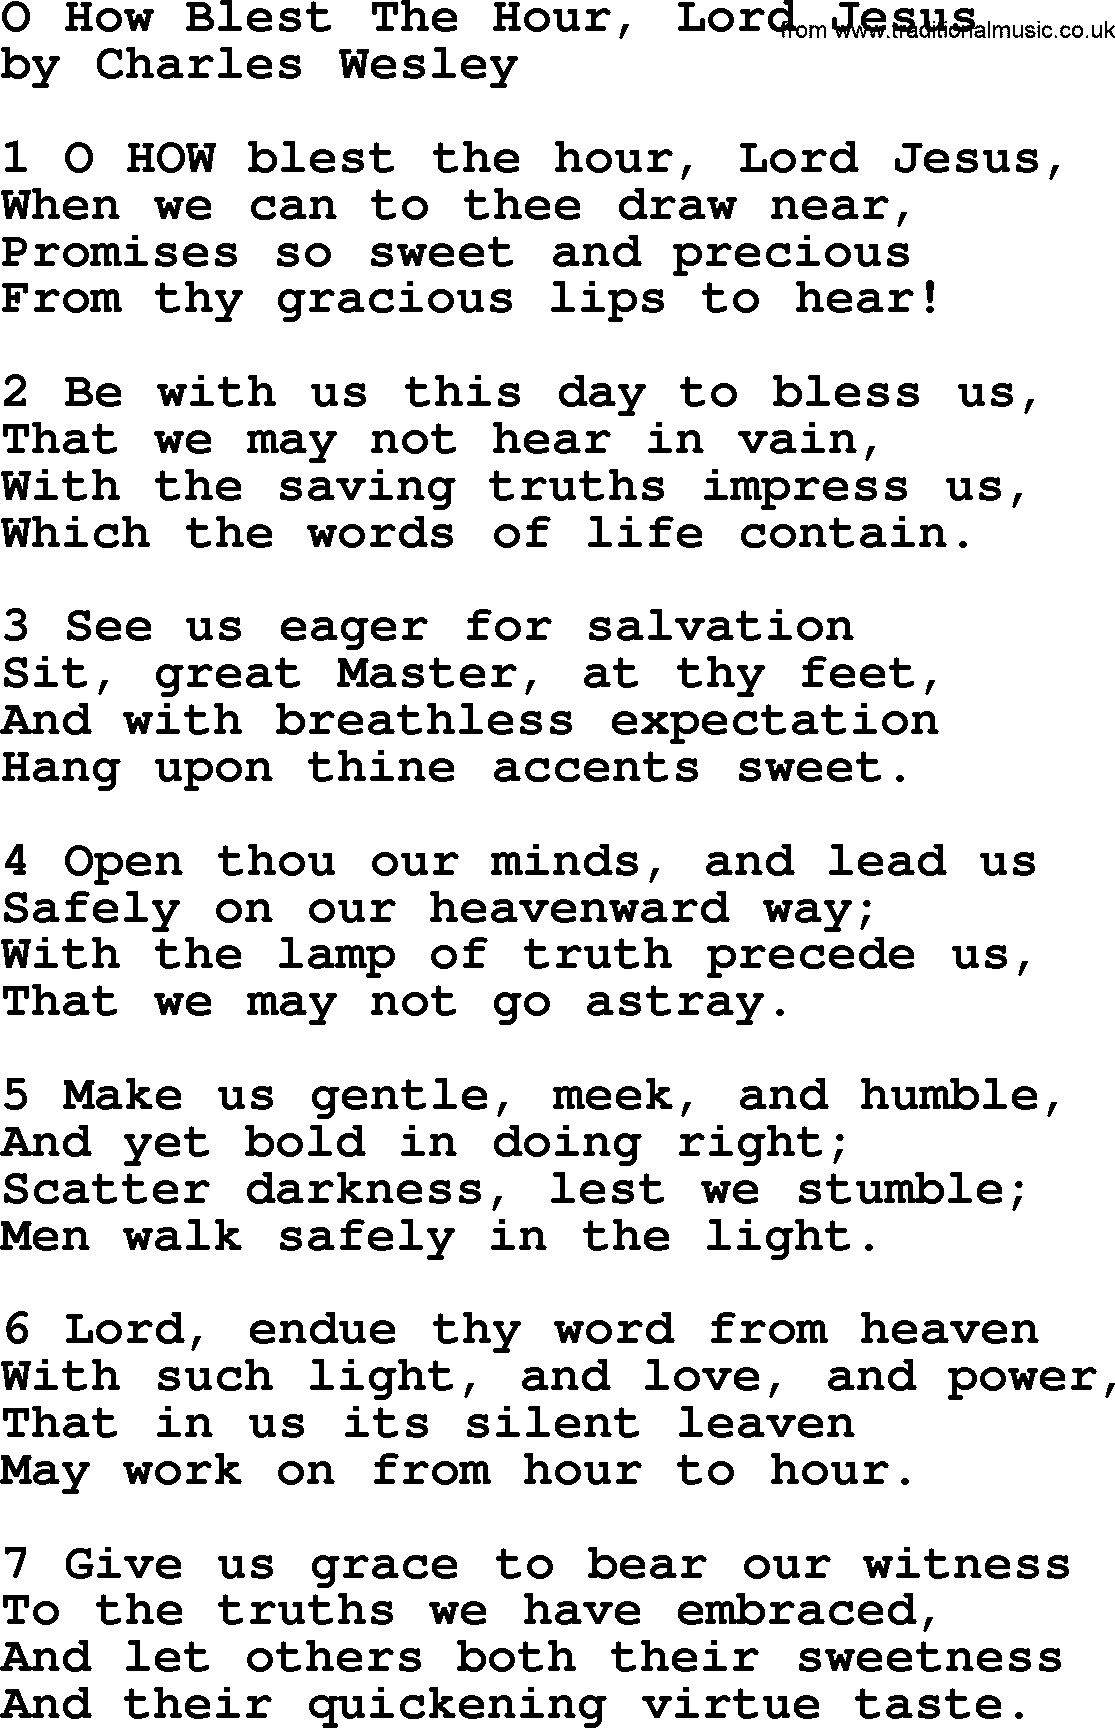 Charles Wesley hymn: O How Blest The Hour, Lord Jesus, lyrics